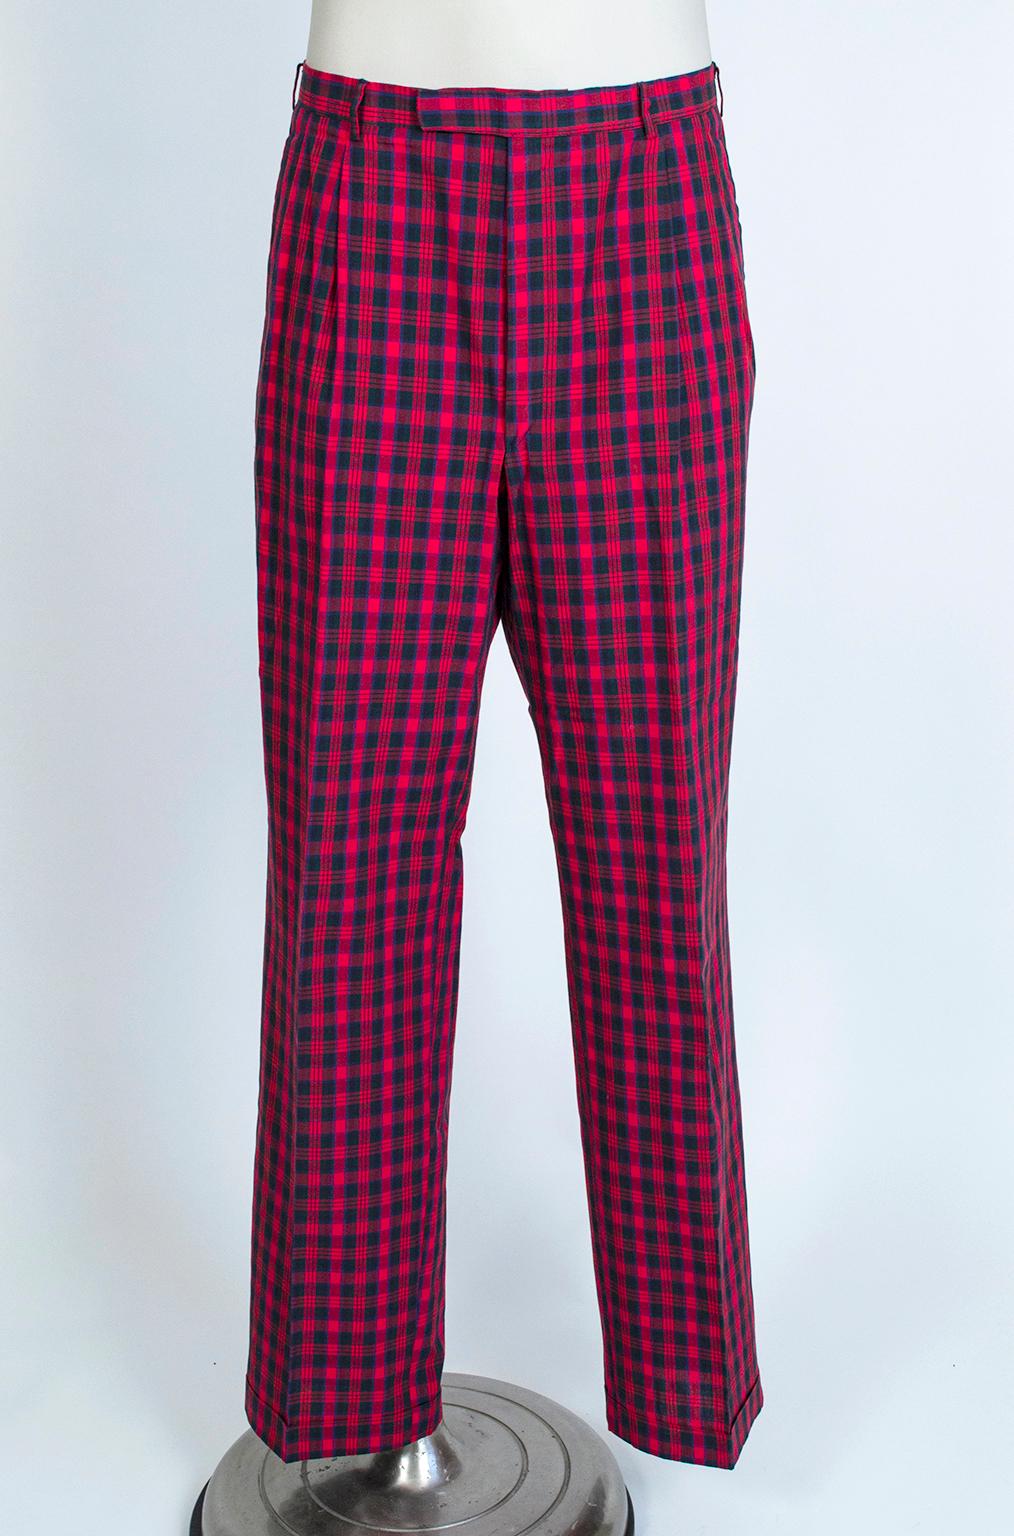 As suitable for 18 holes at St Andrews as Christmas with the inlaws, these incredible trousers will take you through the year with Scottish flair; perfect for pairing with a cardigan or turtleneck. Also available in Spirit of Scotland tartan under